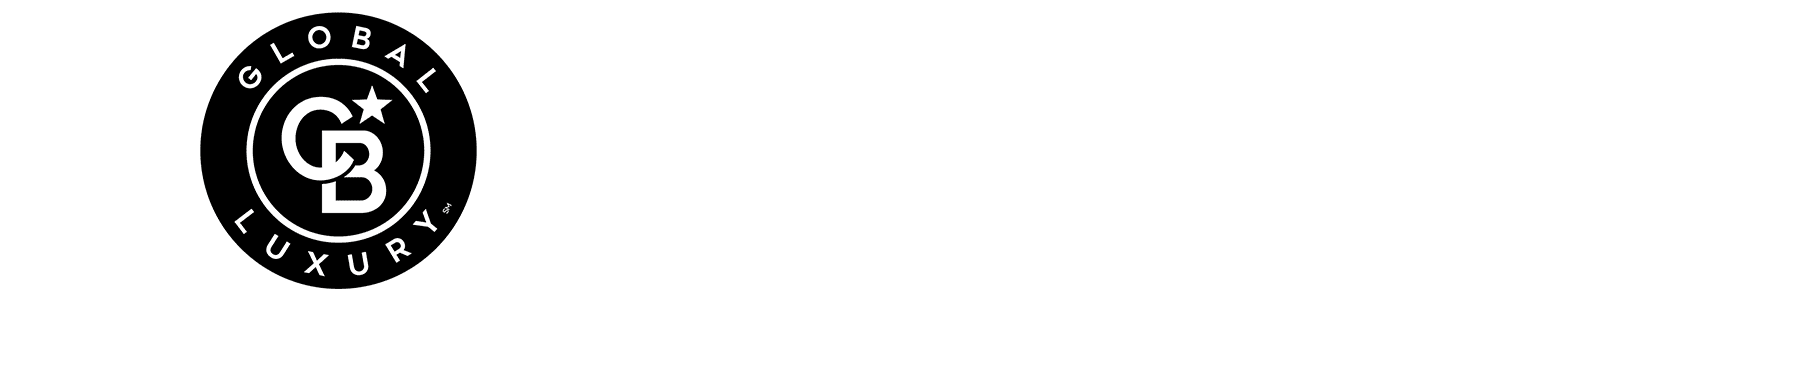 Norm Kennedy Real Estate Team